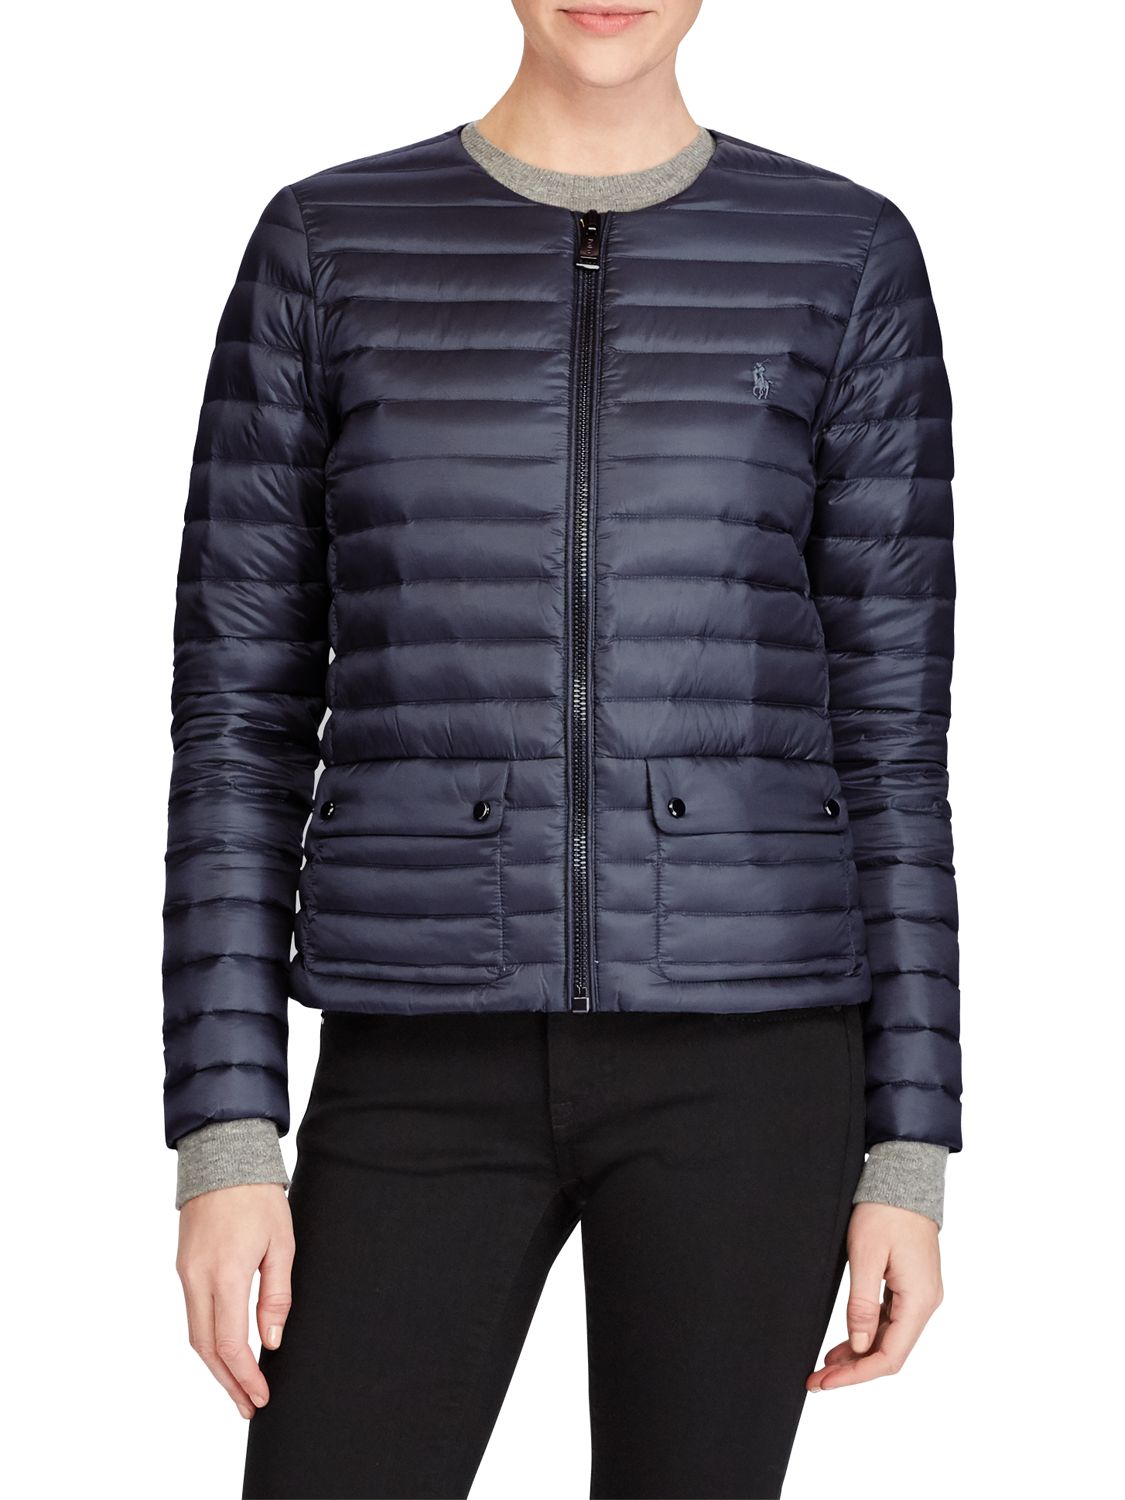 Polo Ralph Lauren Quilted Puffer Down Jacket, Navy at John Lewis & Partners